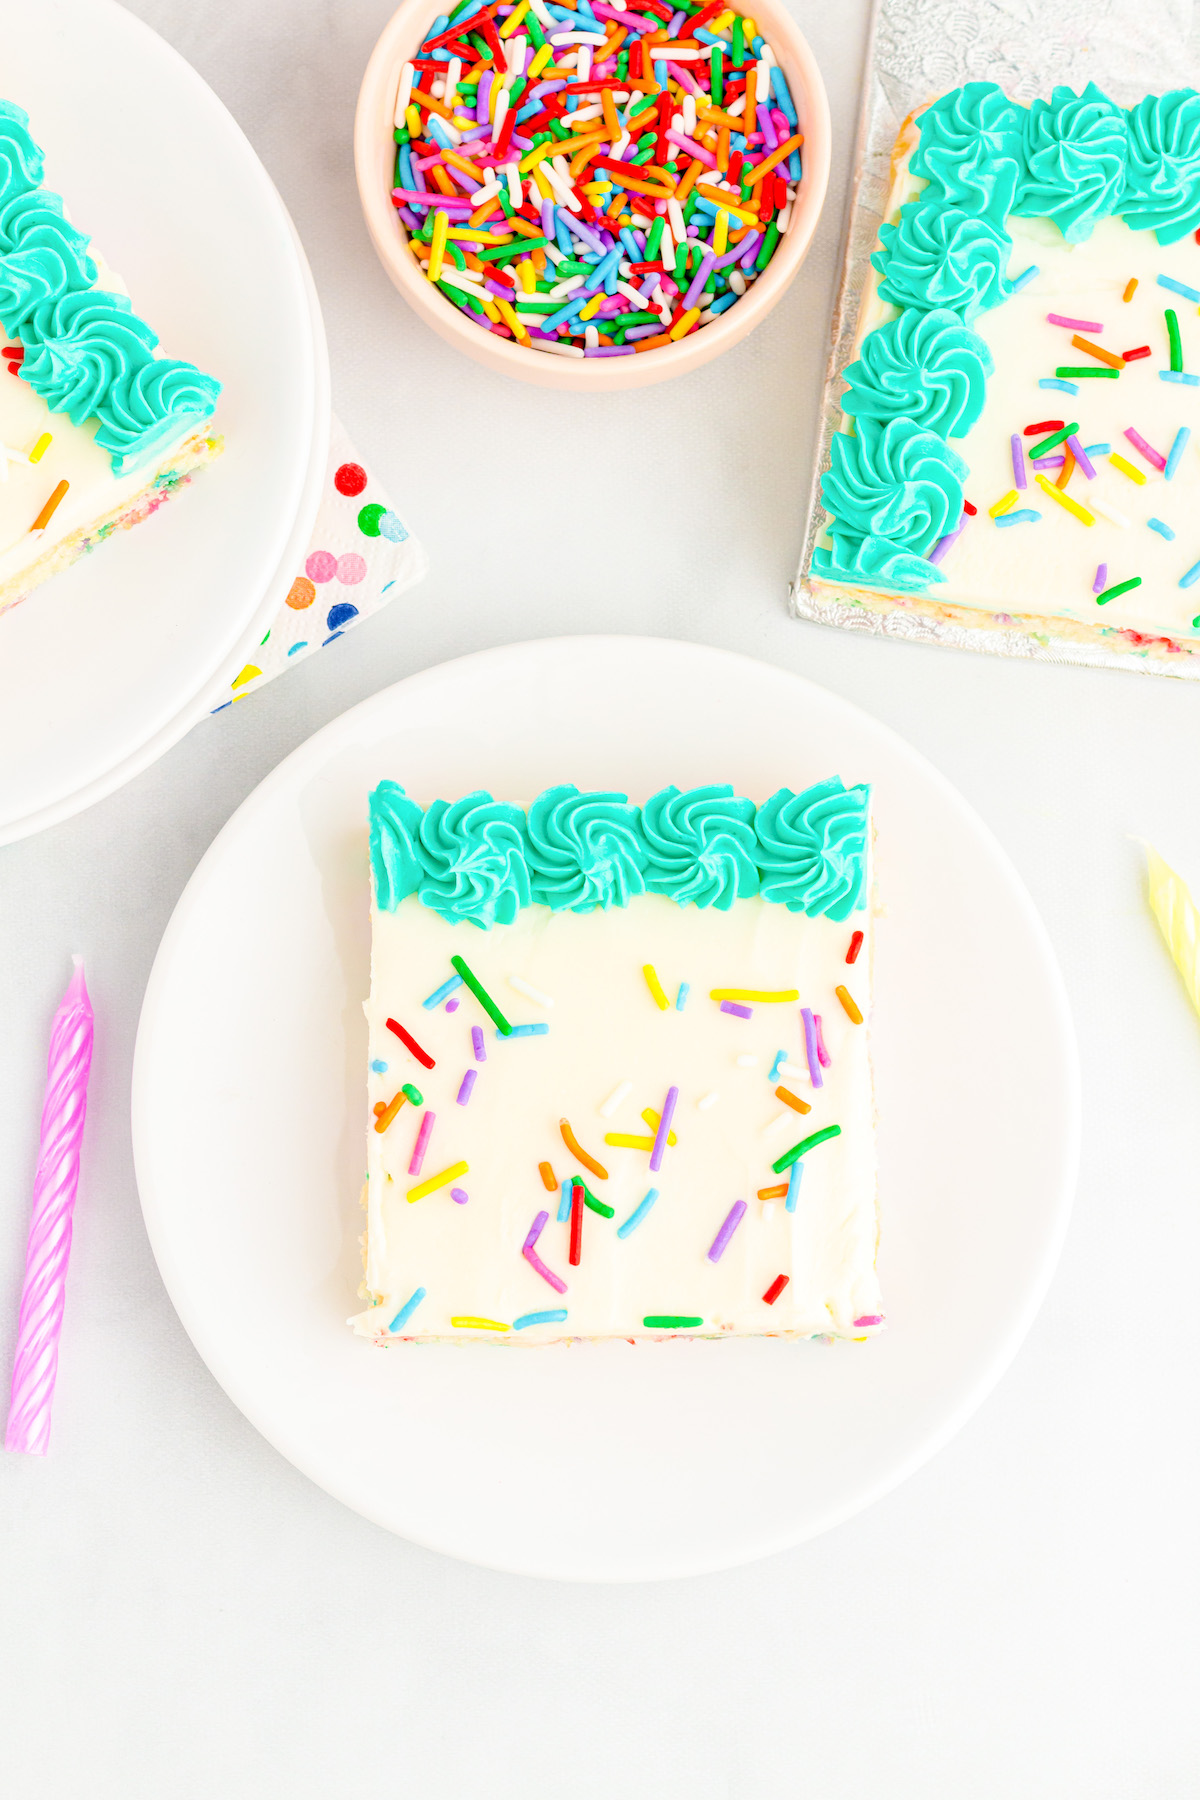 over the top image of birthday cake slice on a small dish